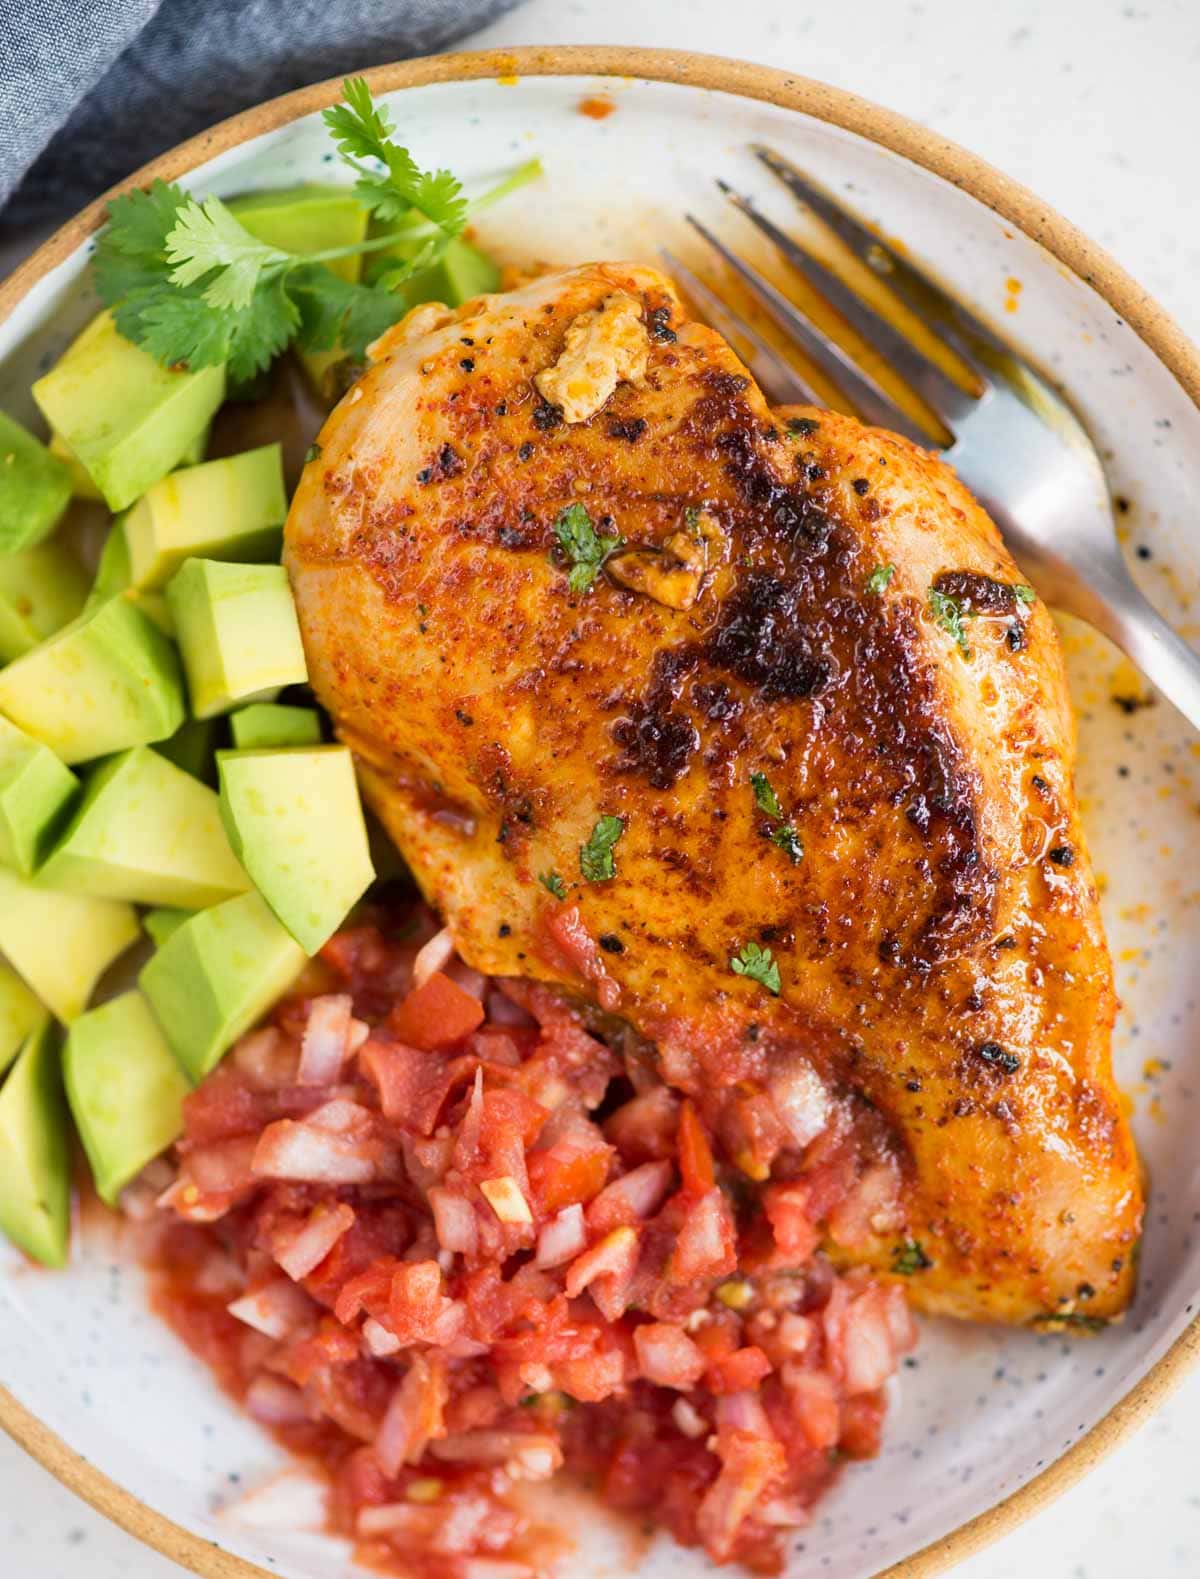 Fajita Stuffed Chicken breast is a different take on Chicken Fajita. Chicken breast is stuffed with Caramelized and crunchy peppers, onion, Mexican seasoning, and cheese, then baked to perfection. 